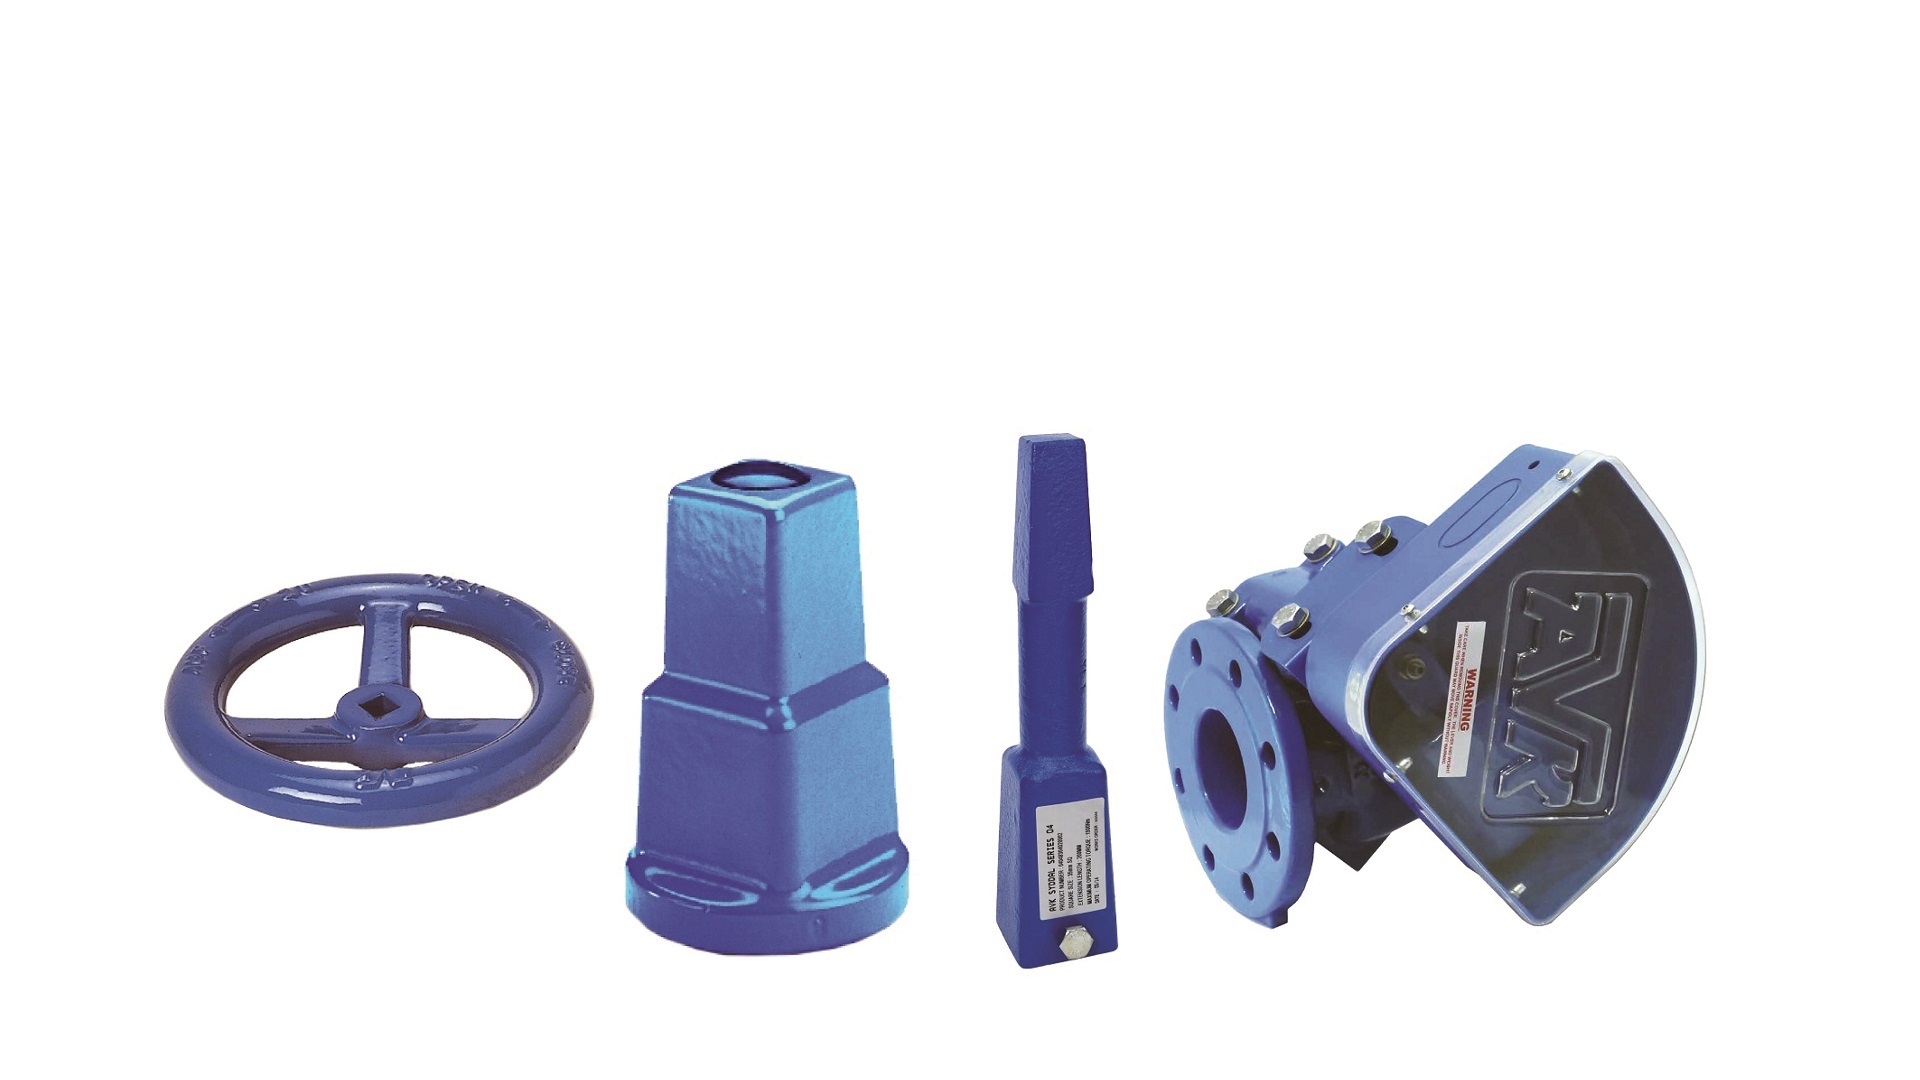 AVK Glenfield Invicta accessories for water and wastewater Valves 